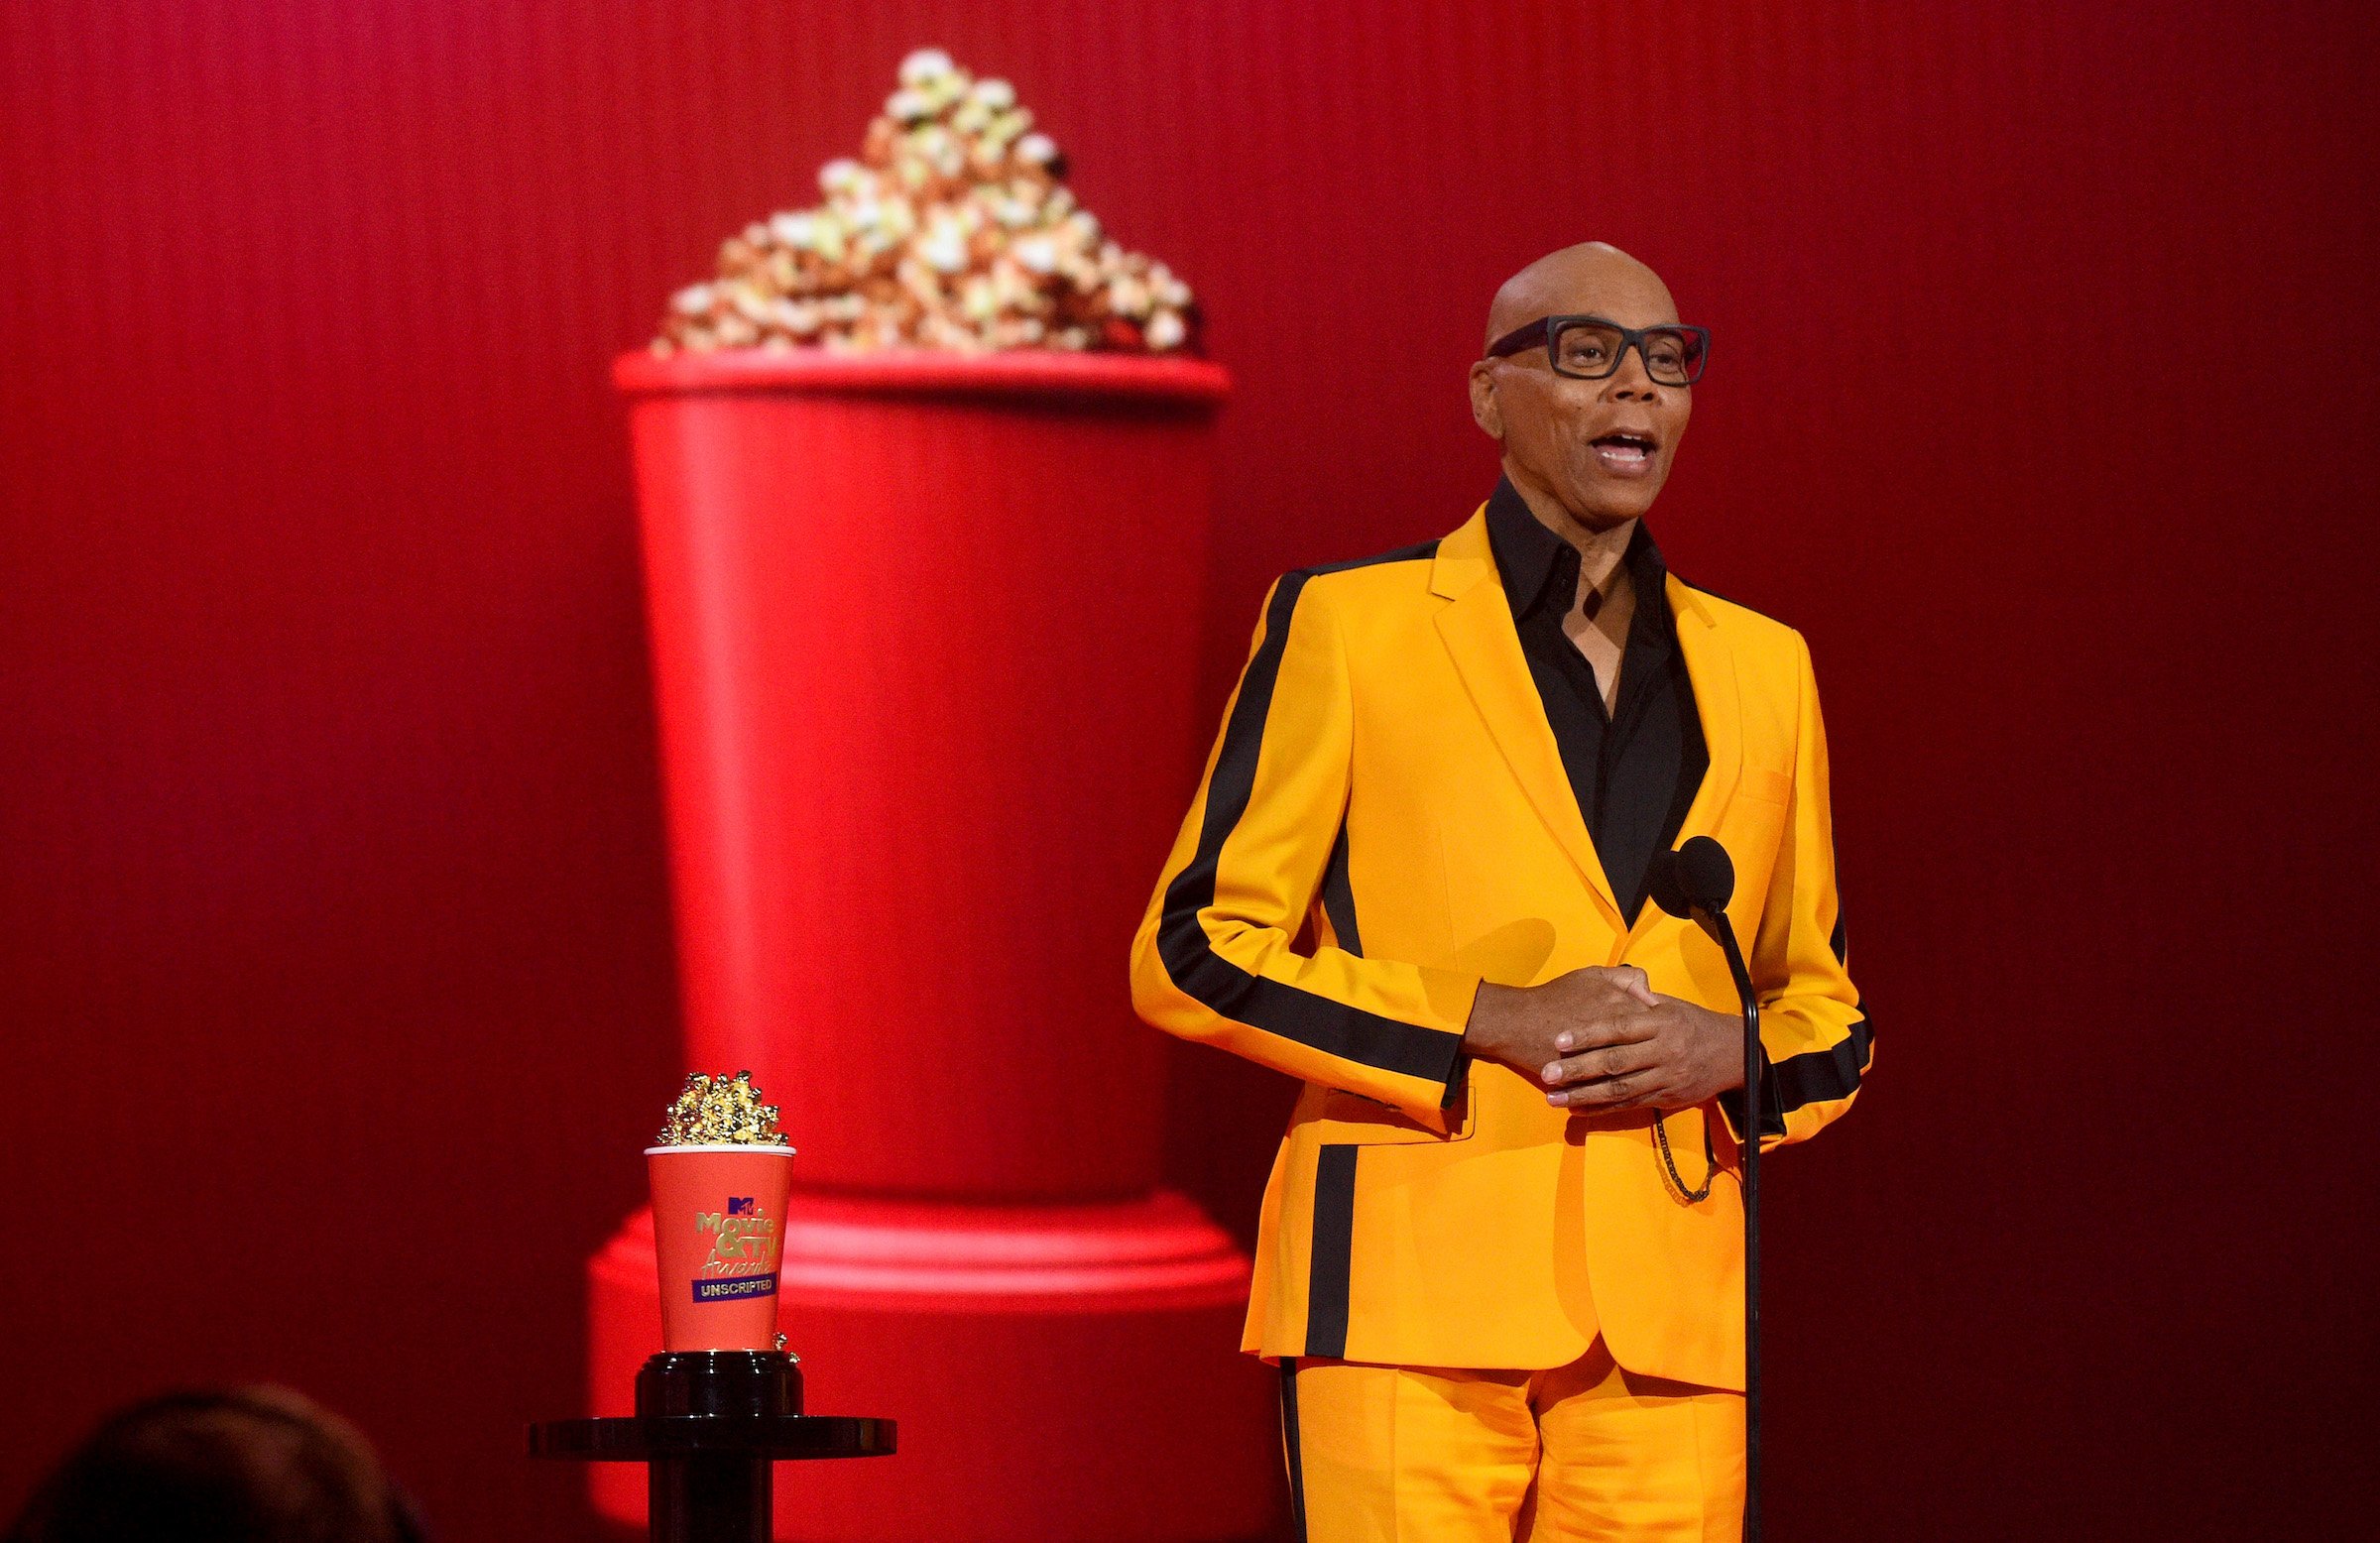 ) RuPaul accepts Best Host for "RuPaul's Drag Race" onstage during the 2021 MTV Movie & TV Awards: UNSCRIPTED